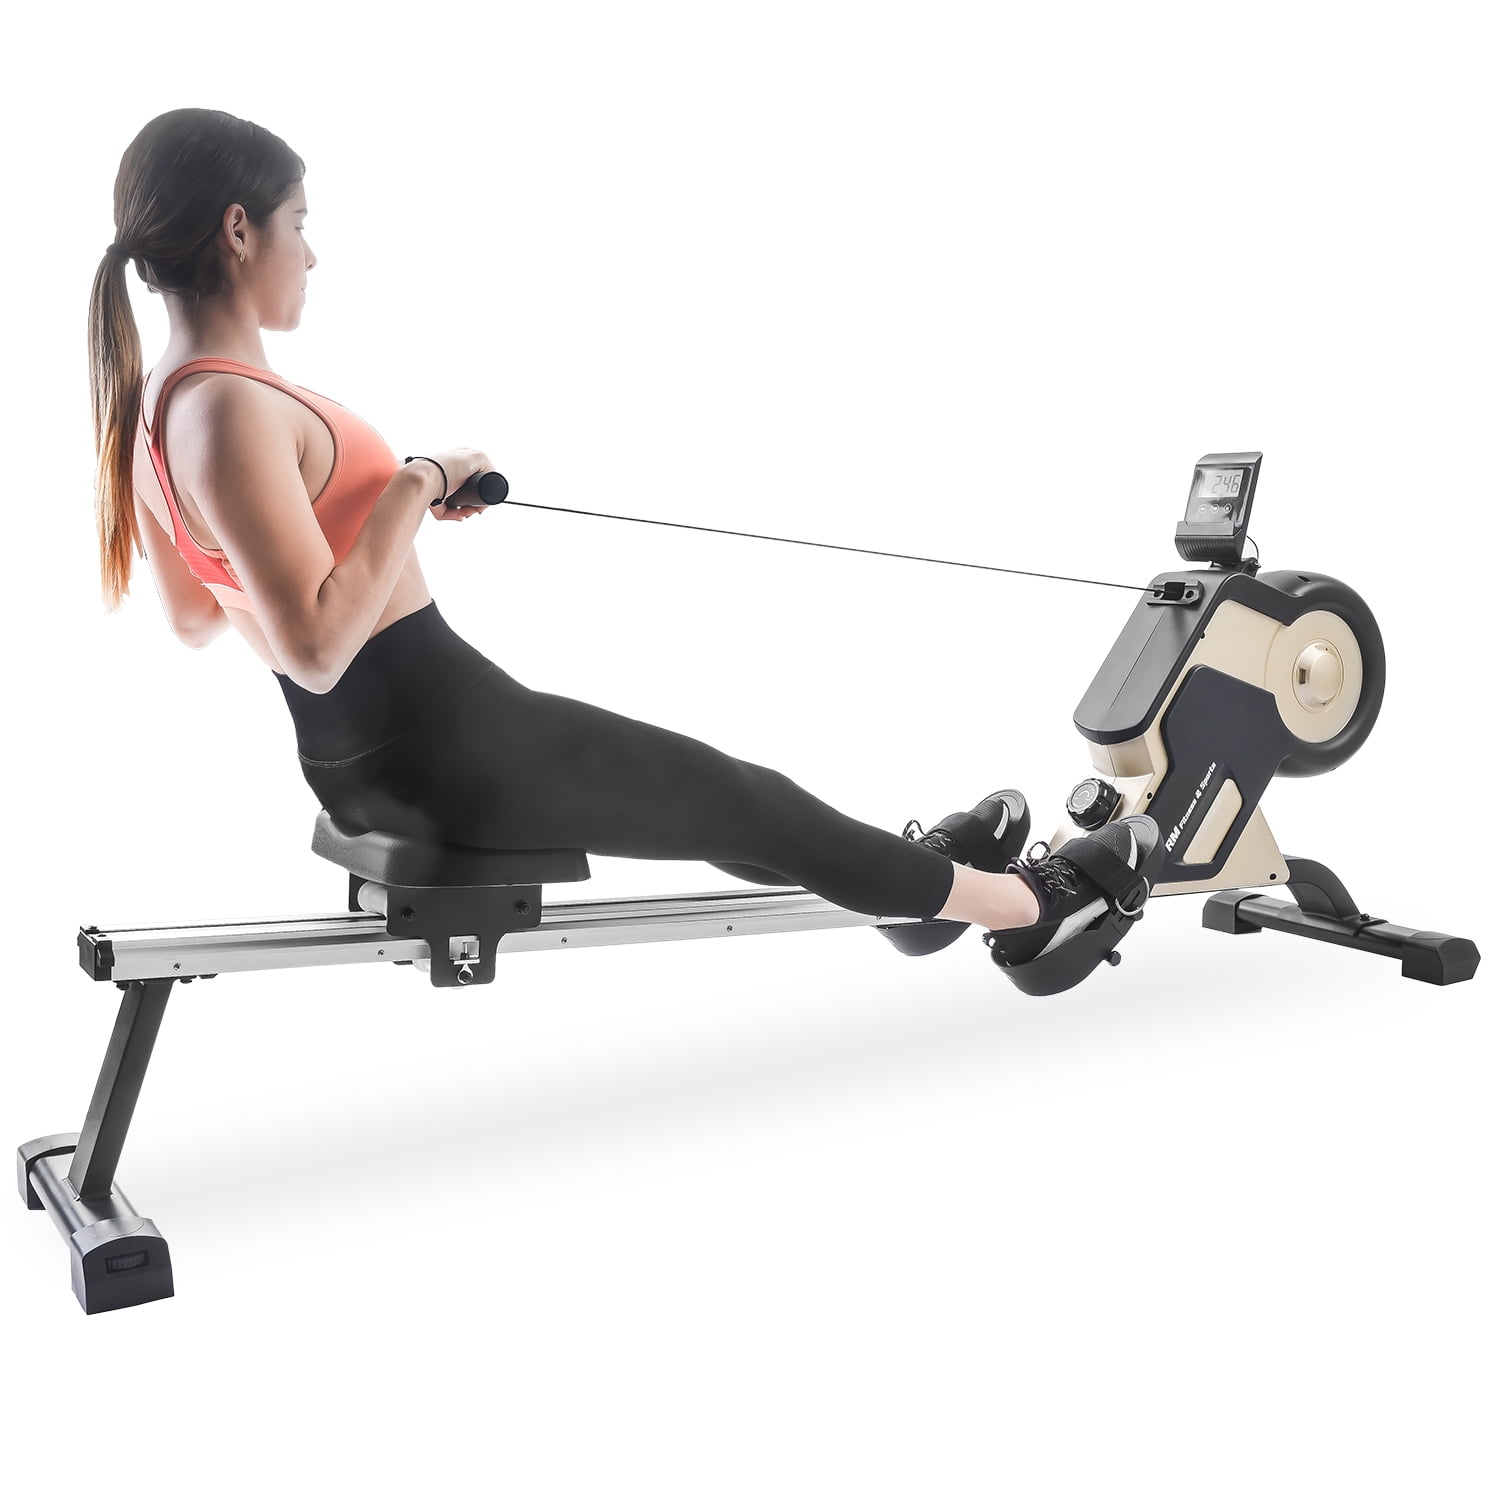 Details about   Magnetic Rowing Machine with LCD Monitor Compact Folding Rower for Home Workout 